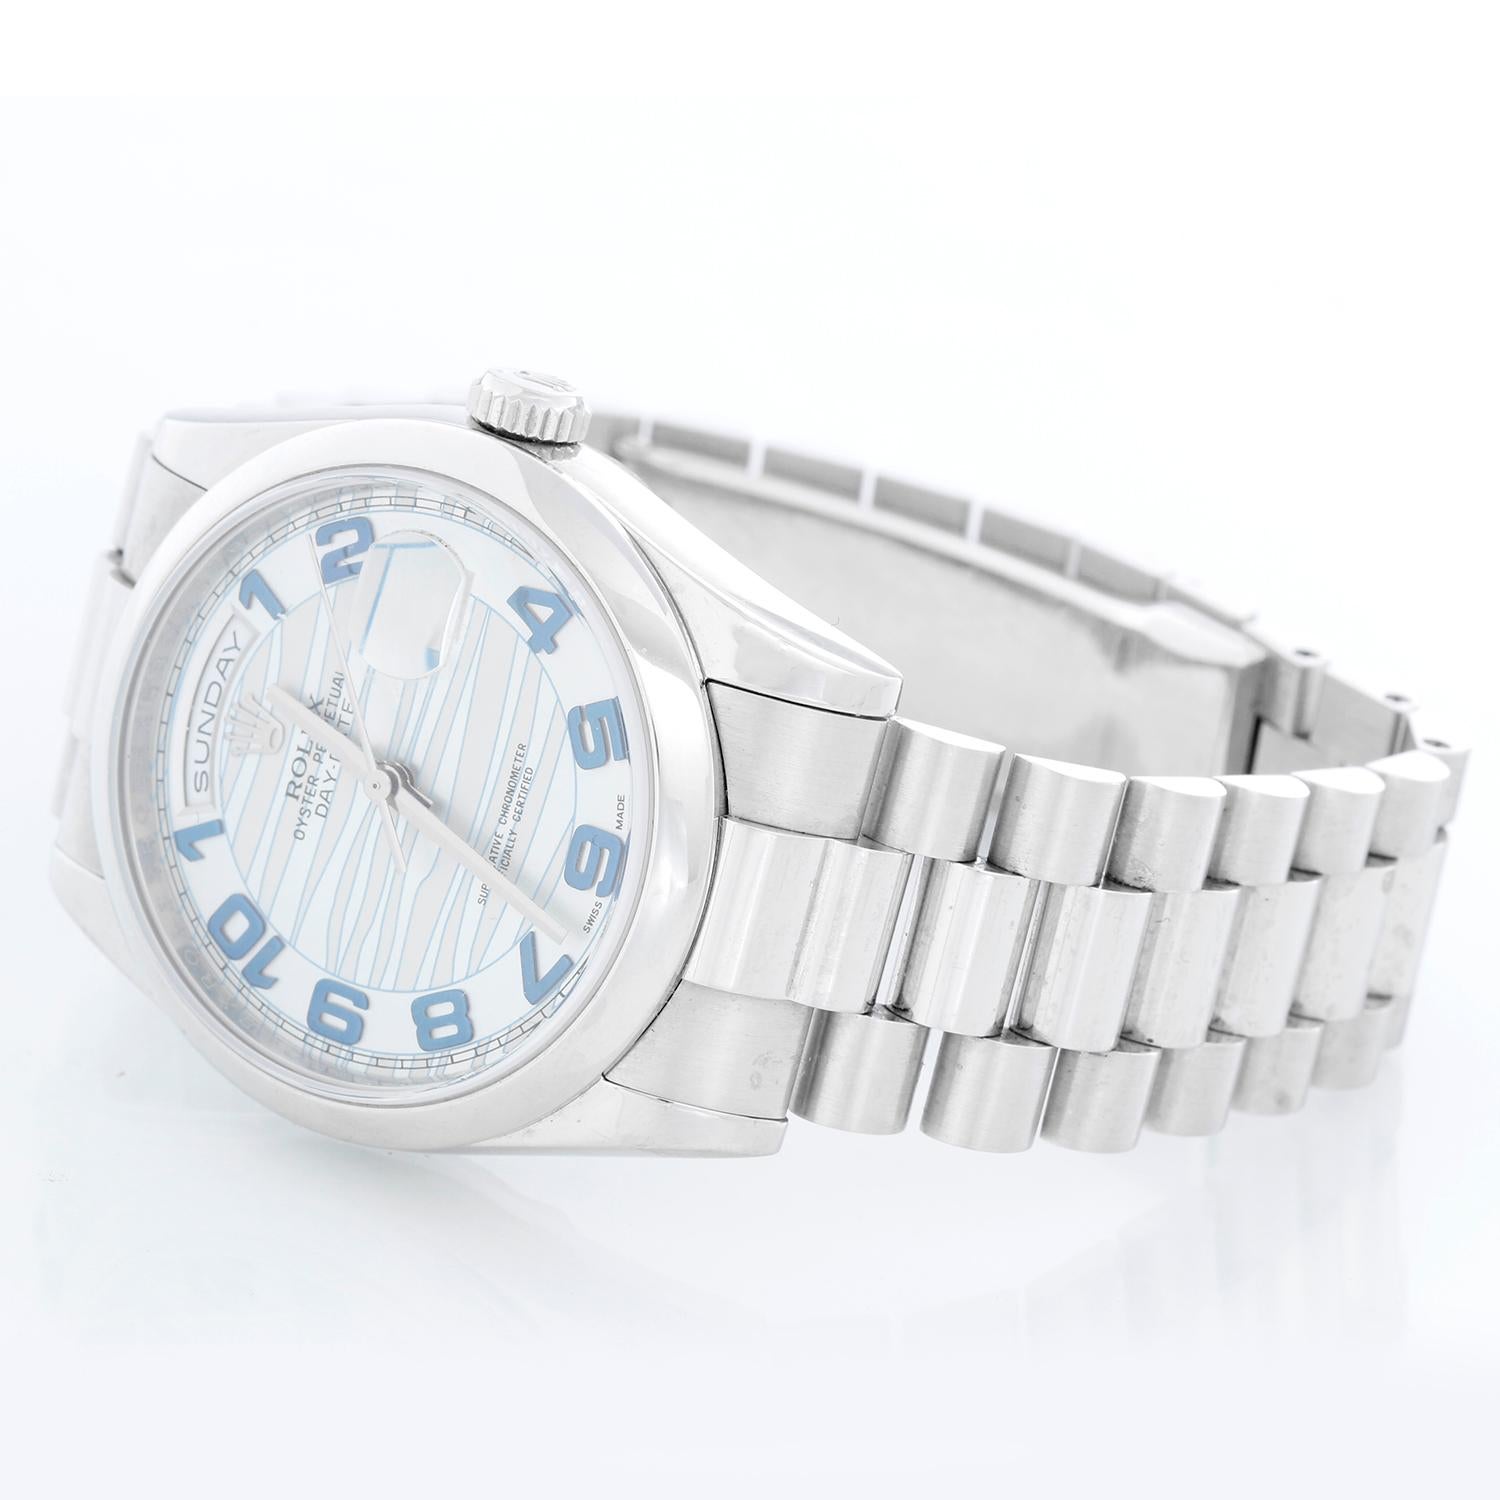 Rolex Platinum President  Day-Date Men's Watch 118206 - Automatic winding, 31 jewels, Quickset, sapphire crystal. Platinum case with smooth bezel . Glacier blue dial . Platinum hidden clasp President bracelet. Pre-owned with box and books.